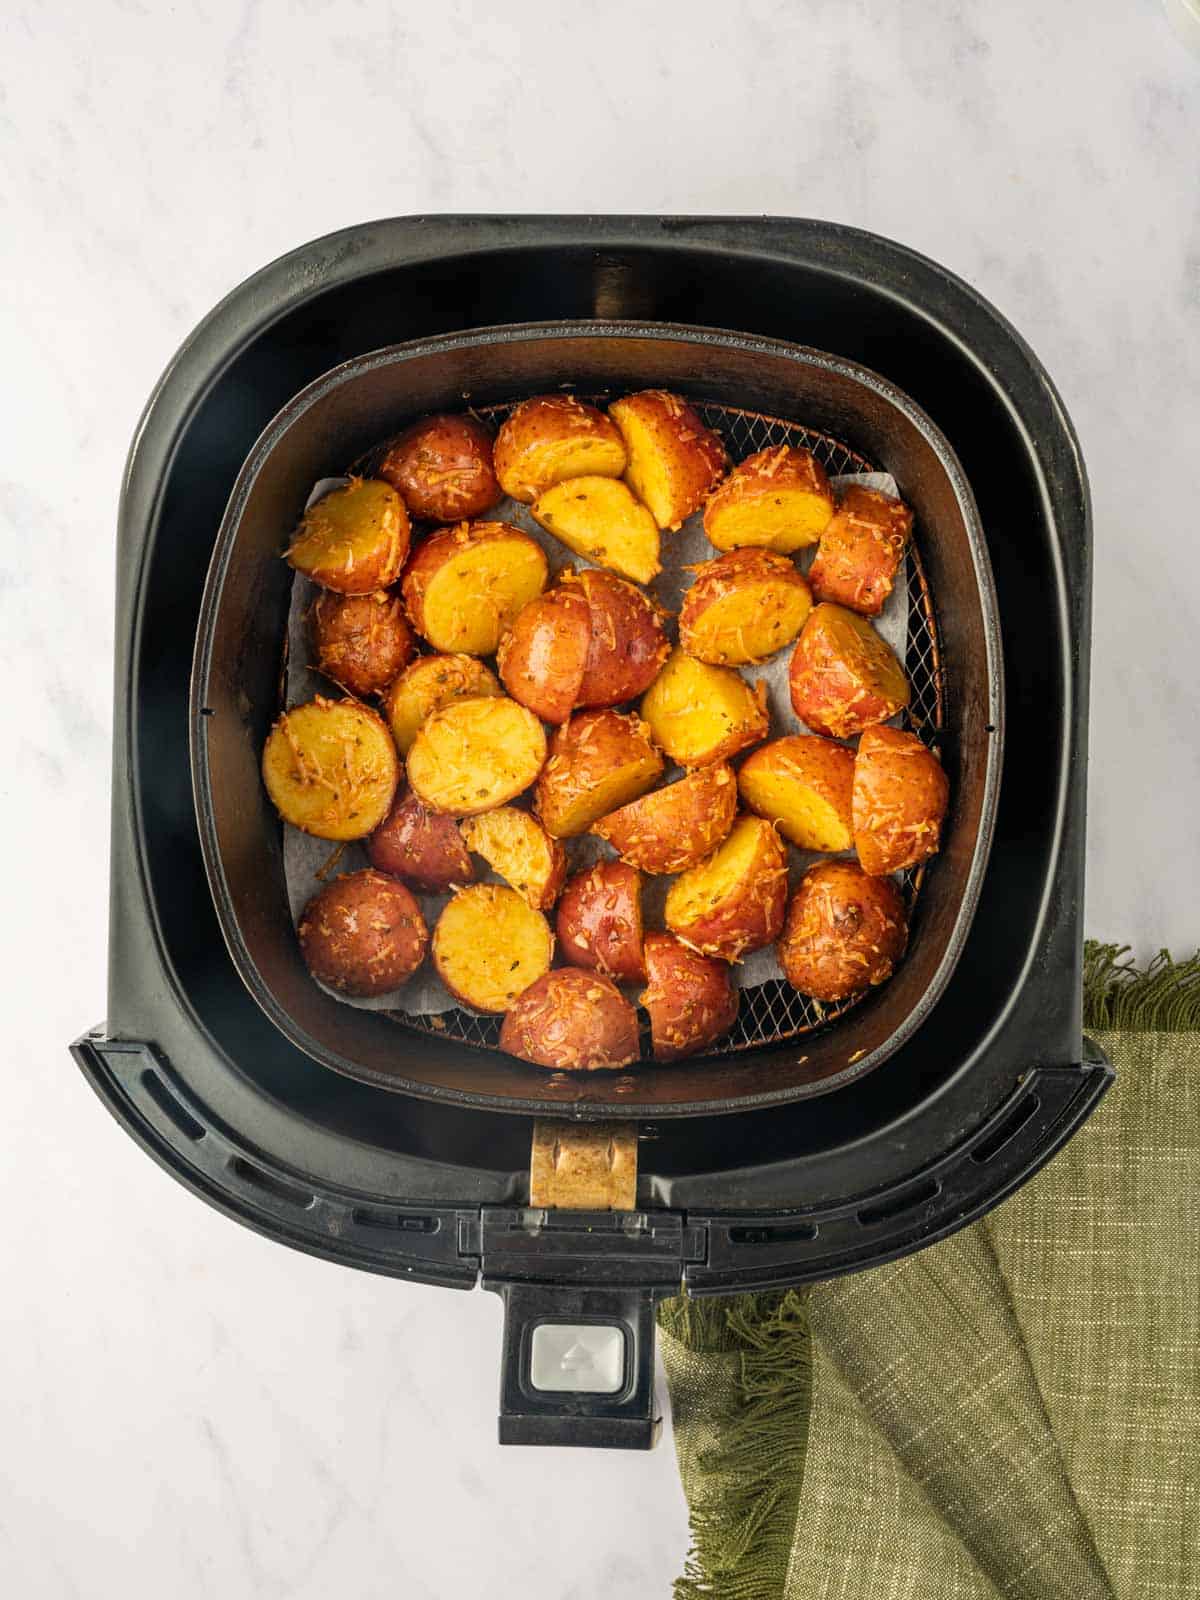 Potatoes in the air fryer.